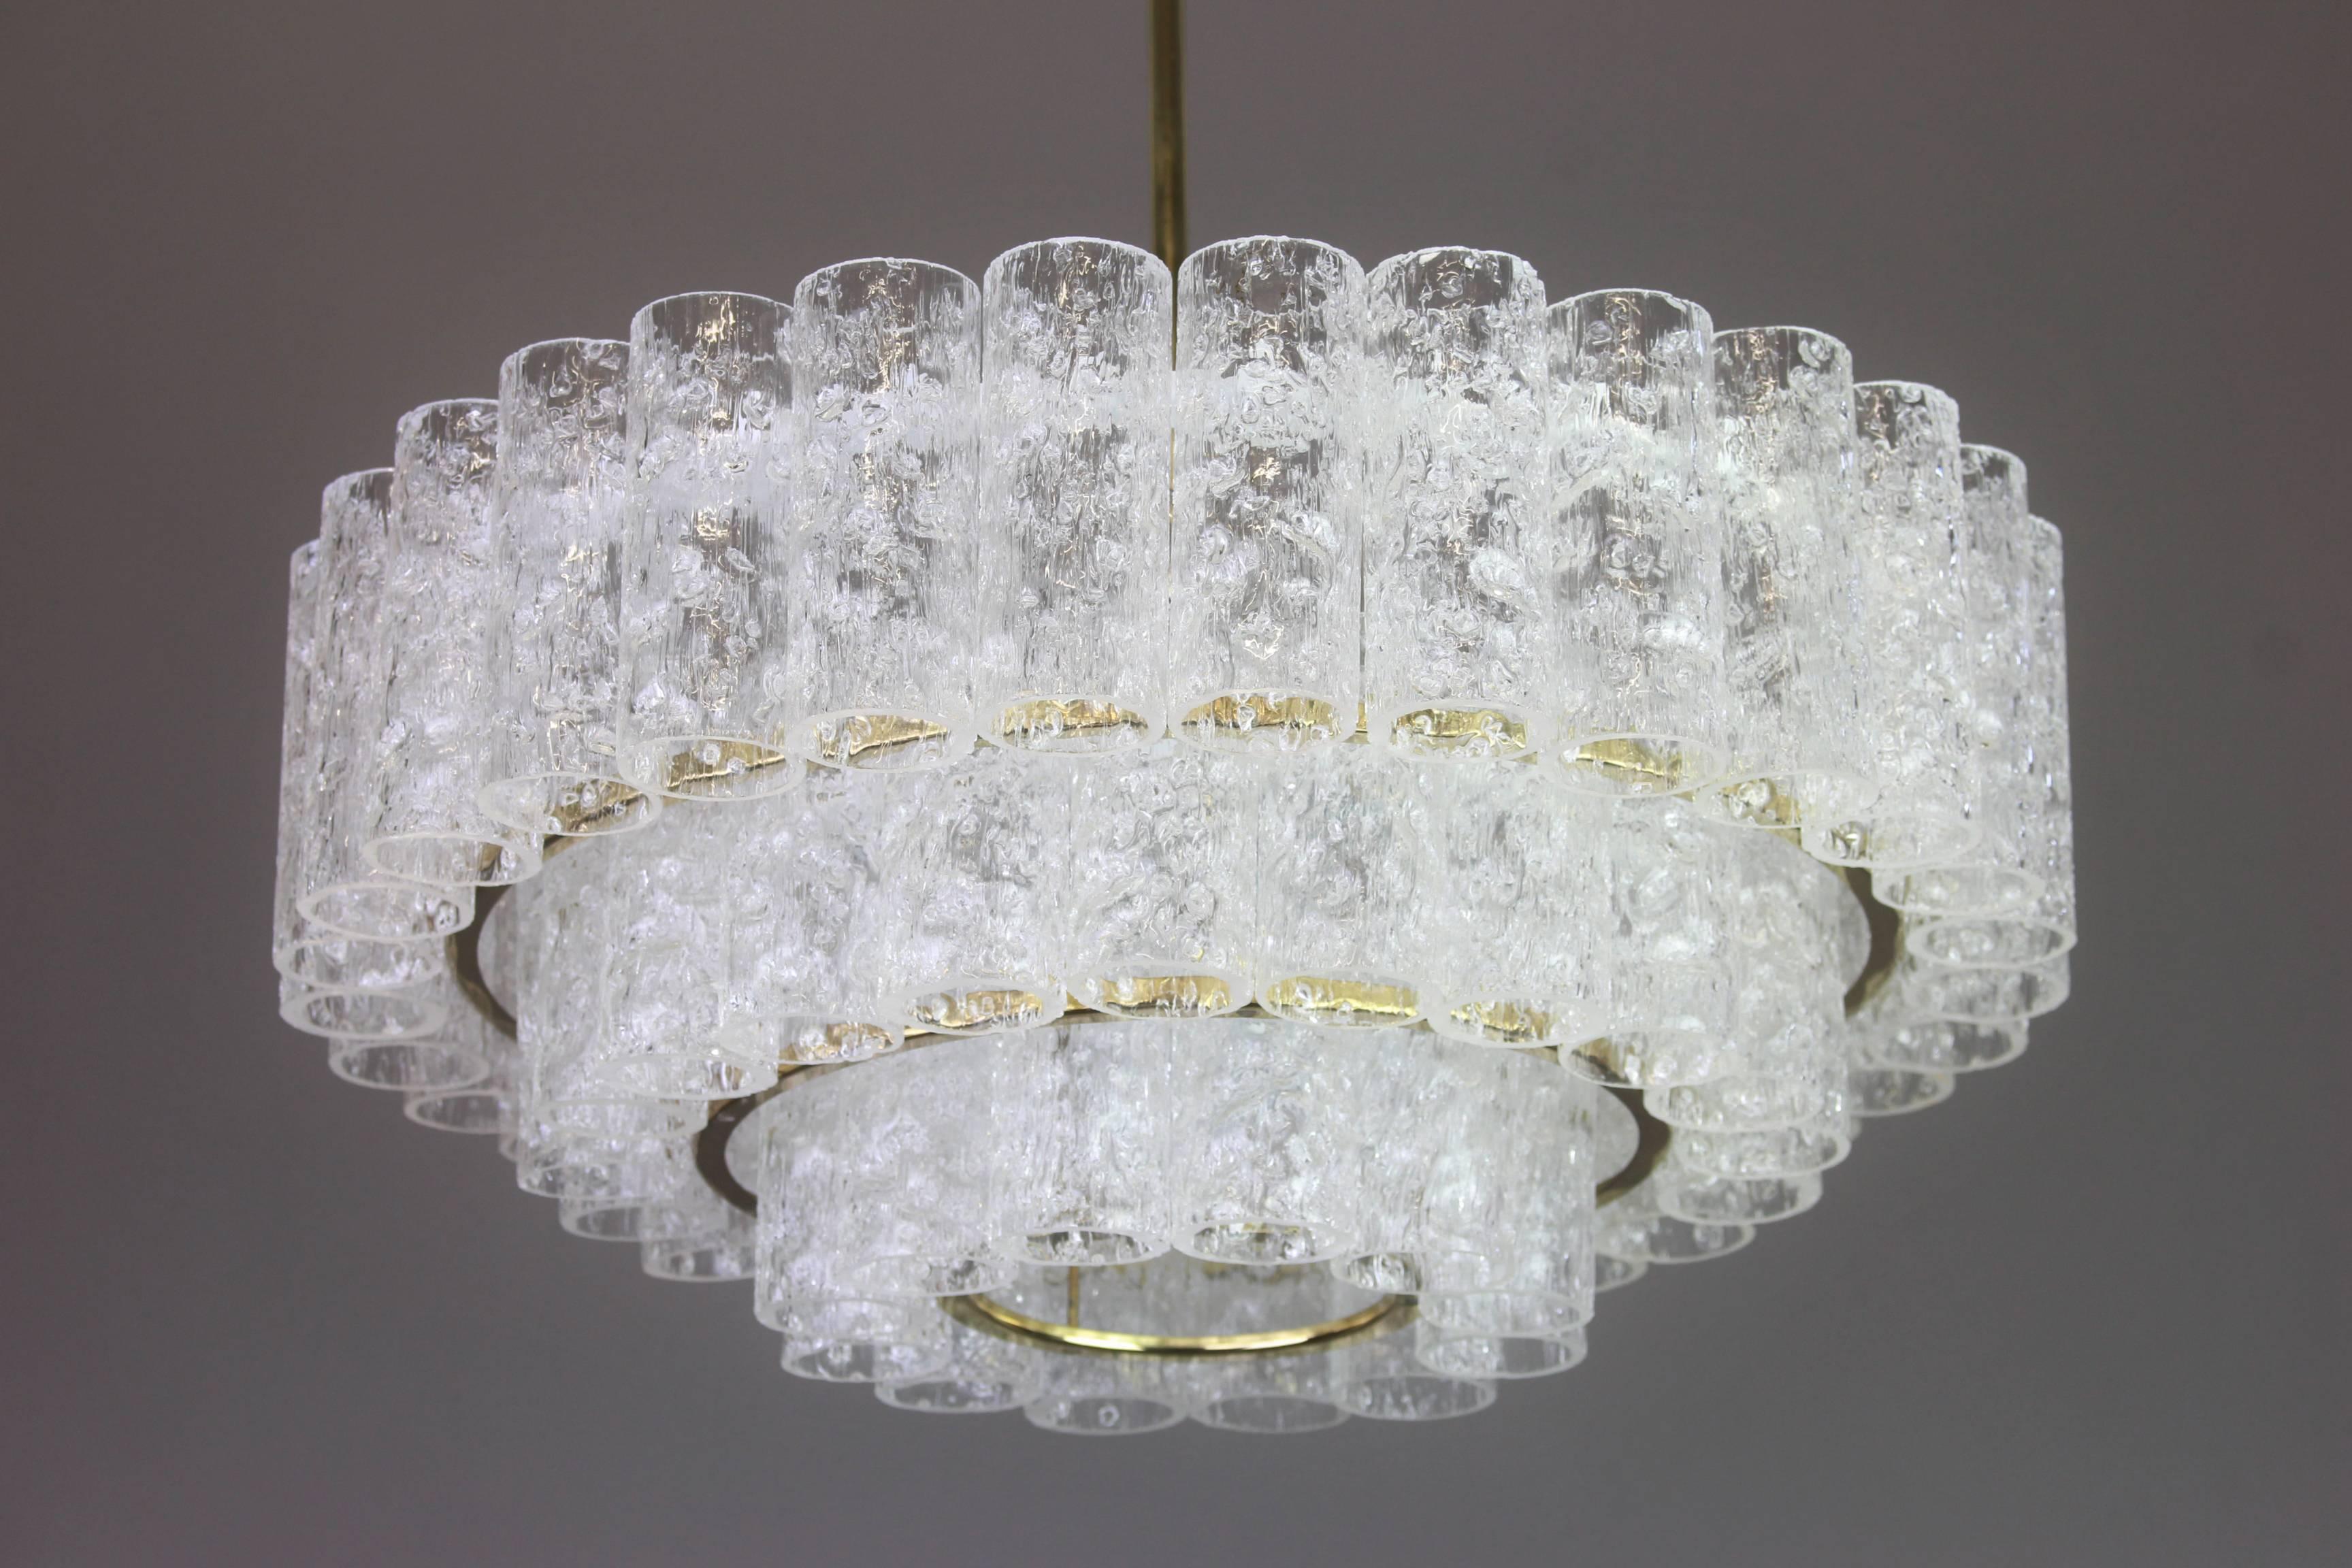 Fantastic three-tier midcentury chandelier by Doria, Germany, manufactured, circa 1960-1969. Three rings of Murano glass cylinders suspended from a fixture.
Heavy quality and in very good condition. Cleaned, well-wired and ready to use.
The